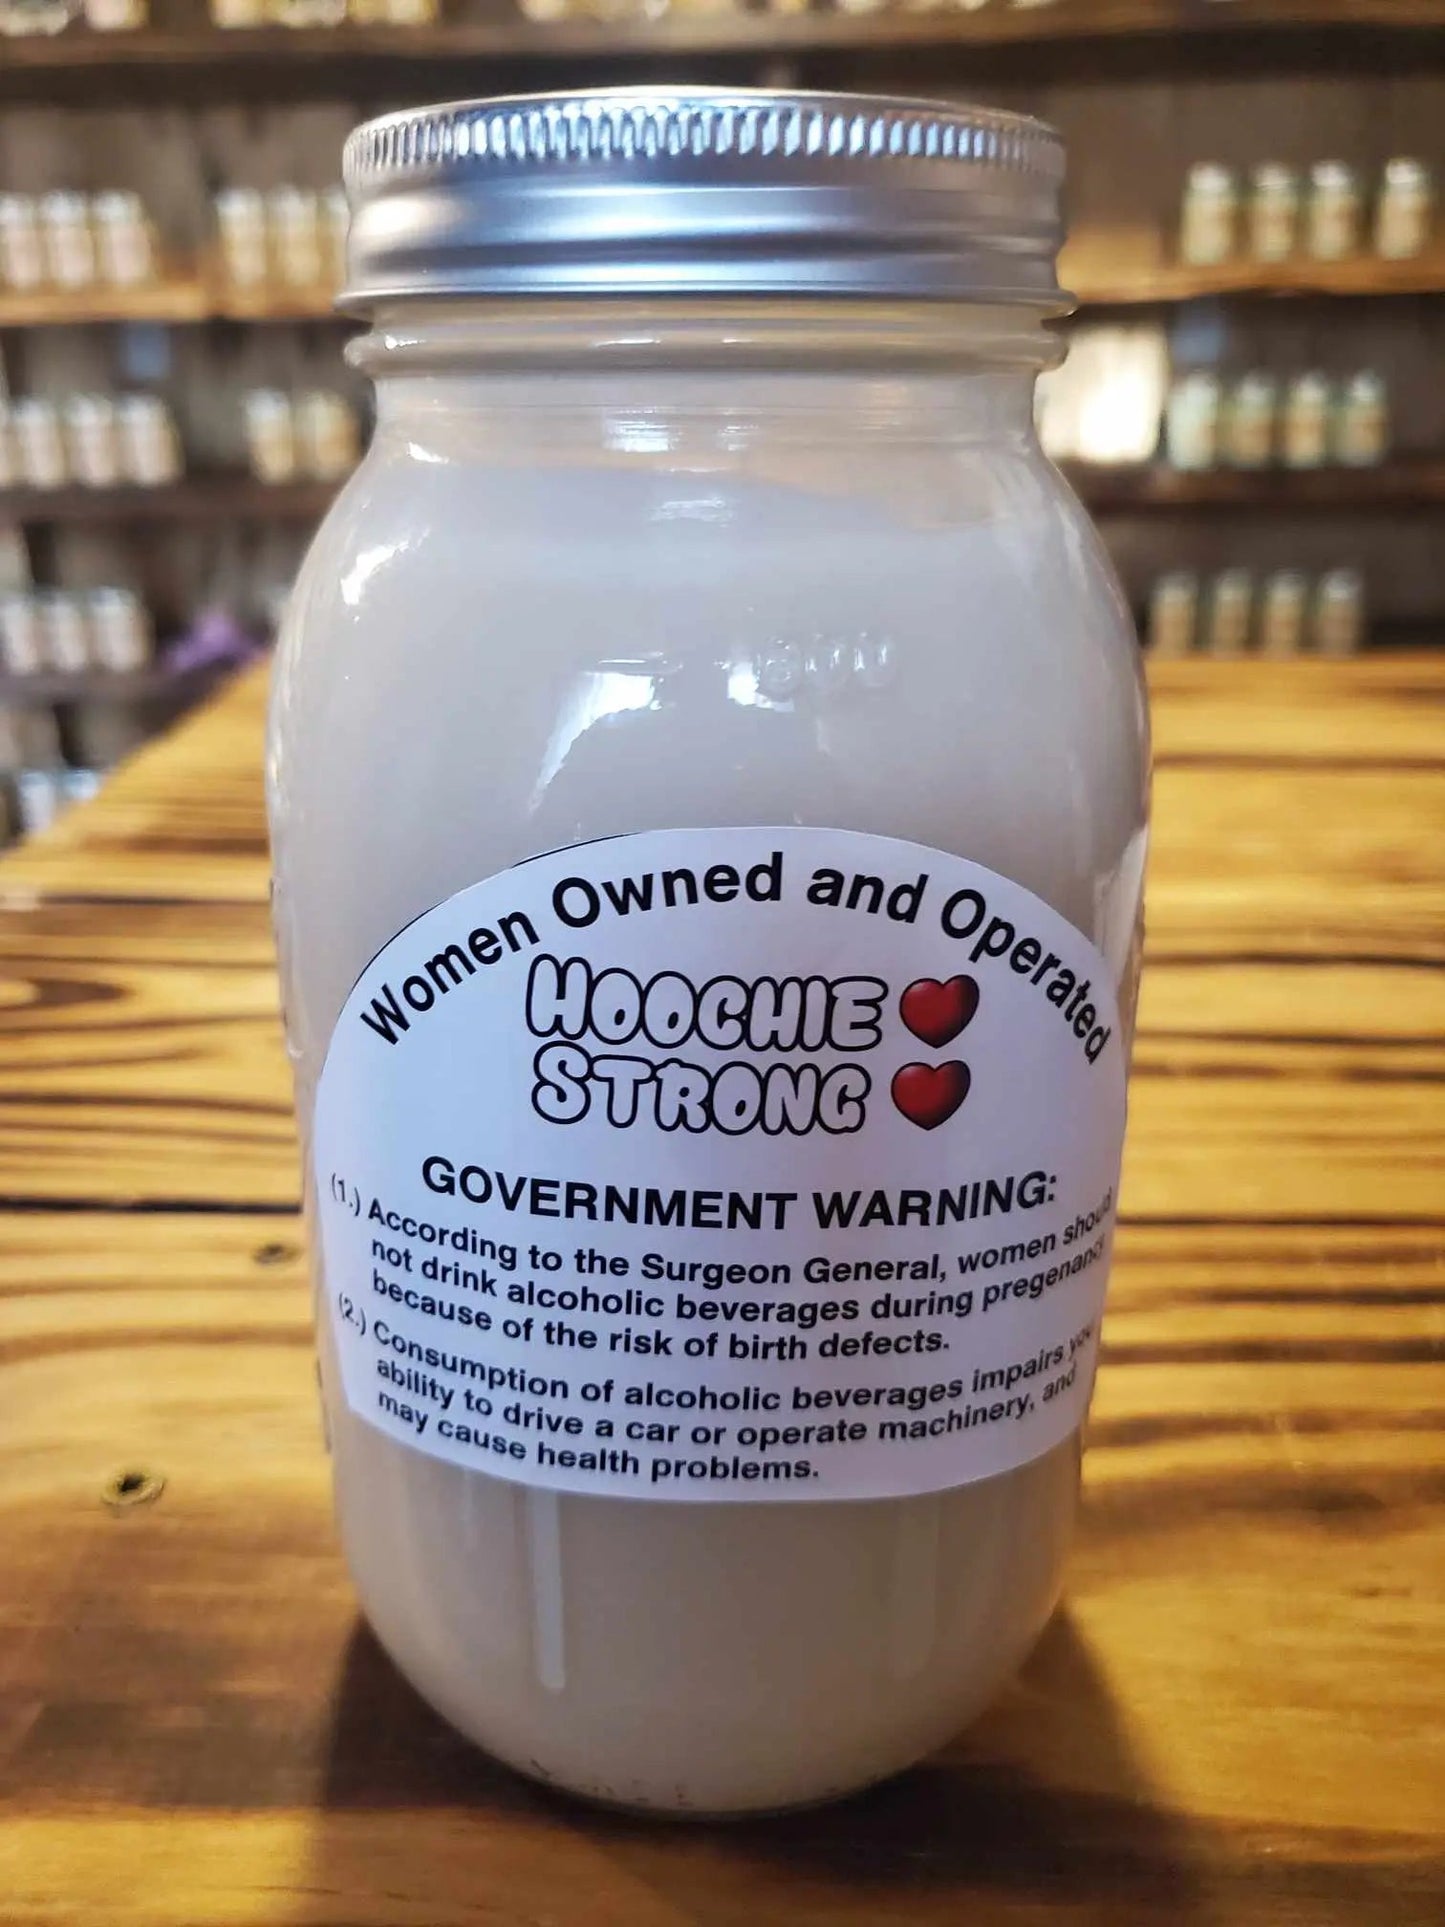 Root Beer Float Sipping Cream Moonshine | Hoochie Hooch Distillery Hoochie Hooch Distillery